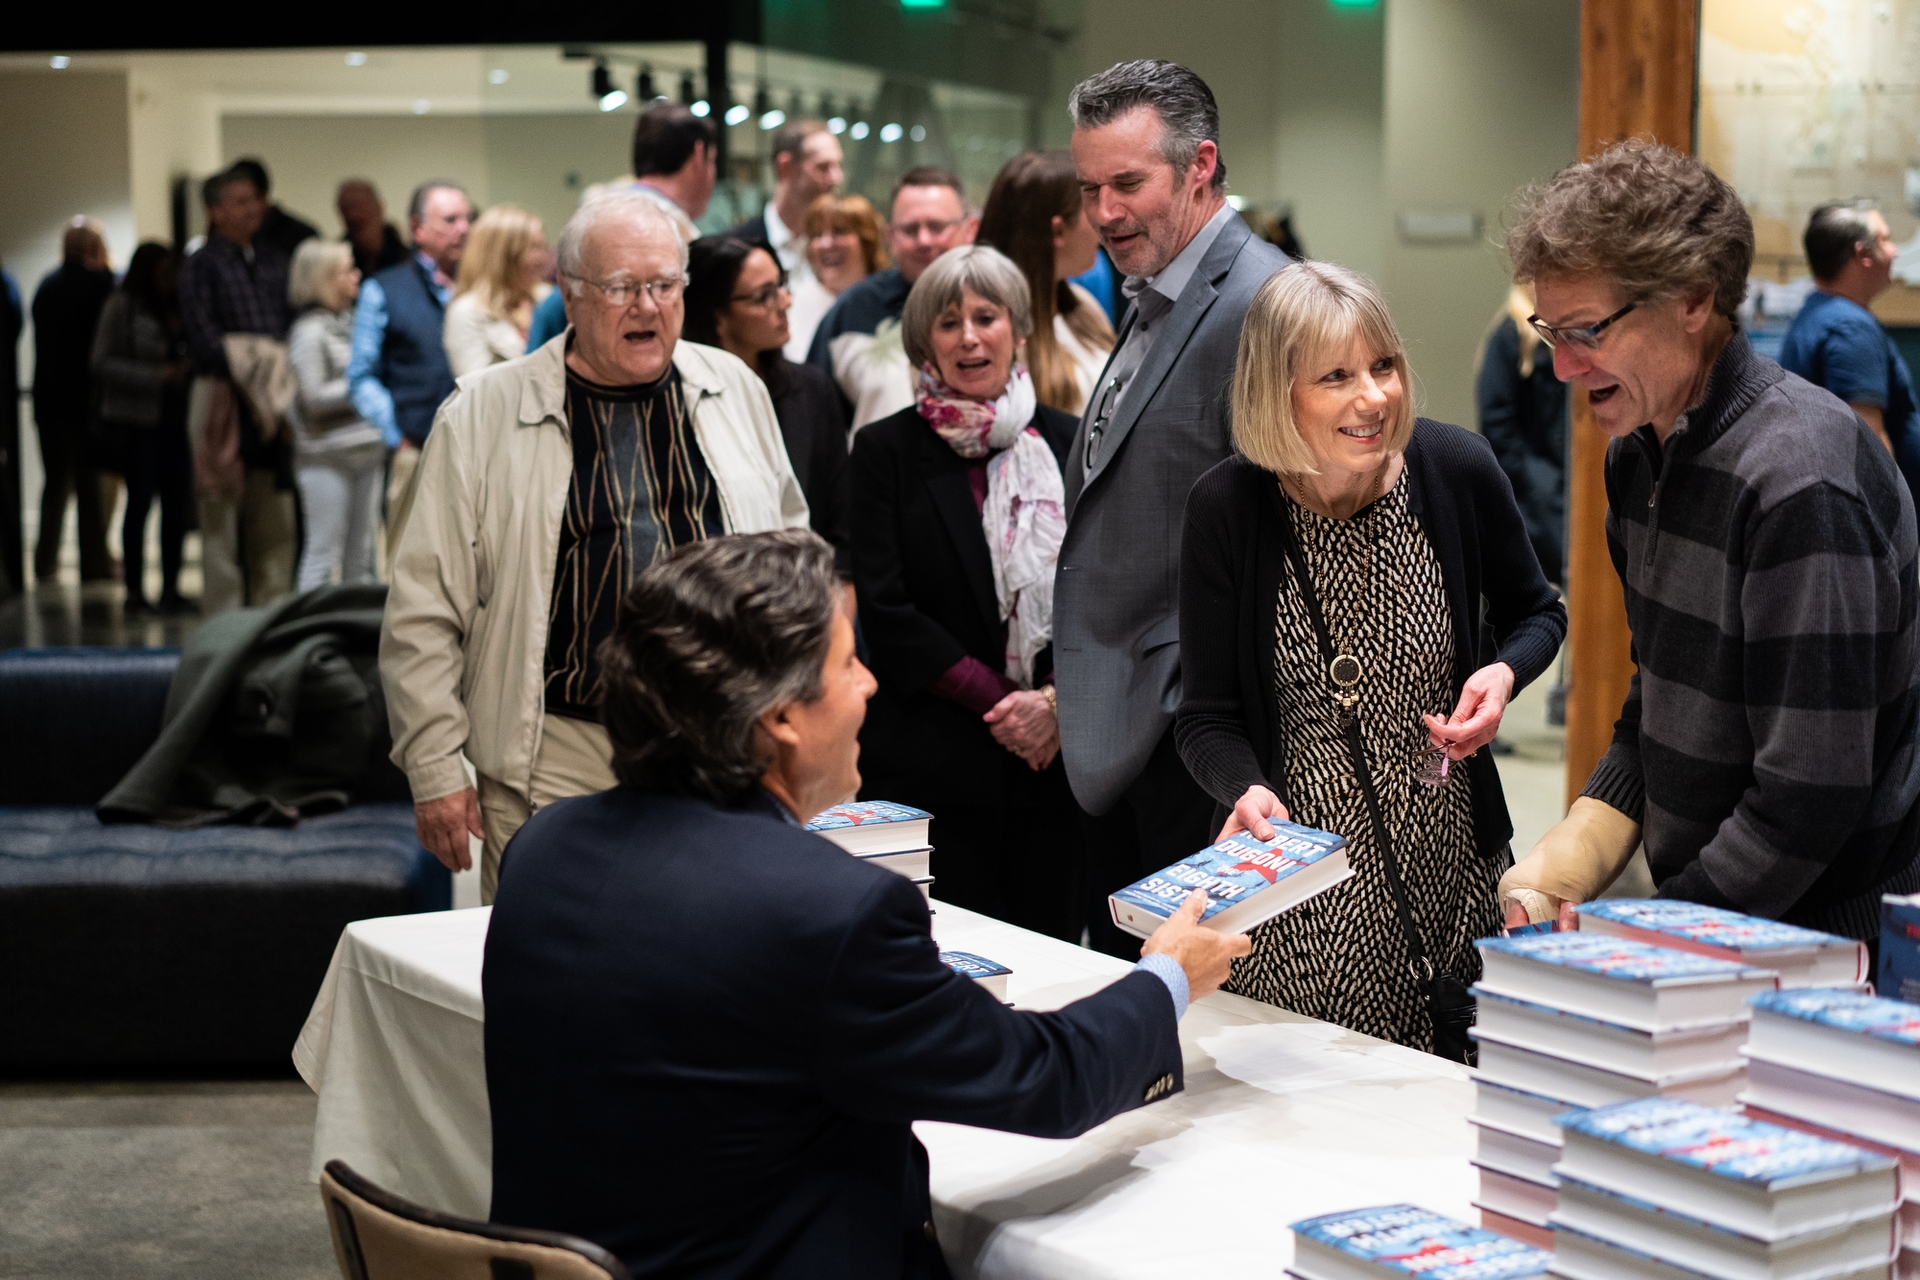 Author Robert Dugoni sits at a table at a book signing event. Fans stand near him, leaning in to get a book signed and share a few words.